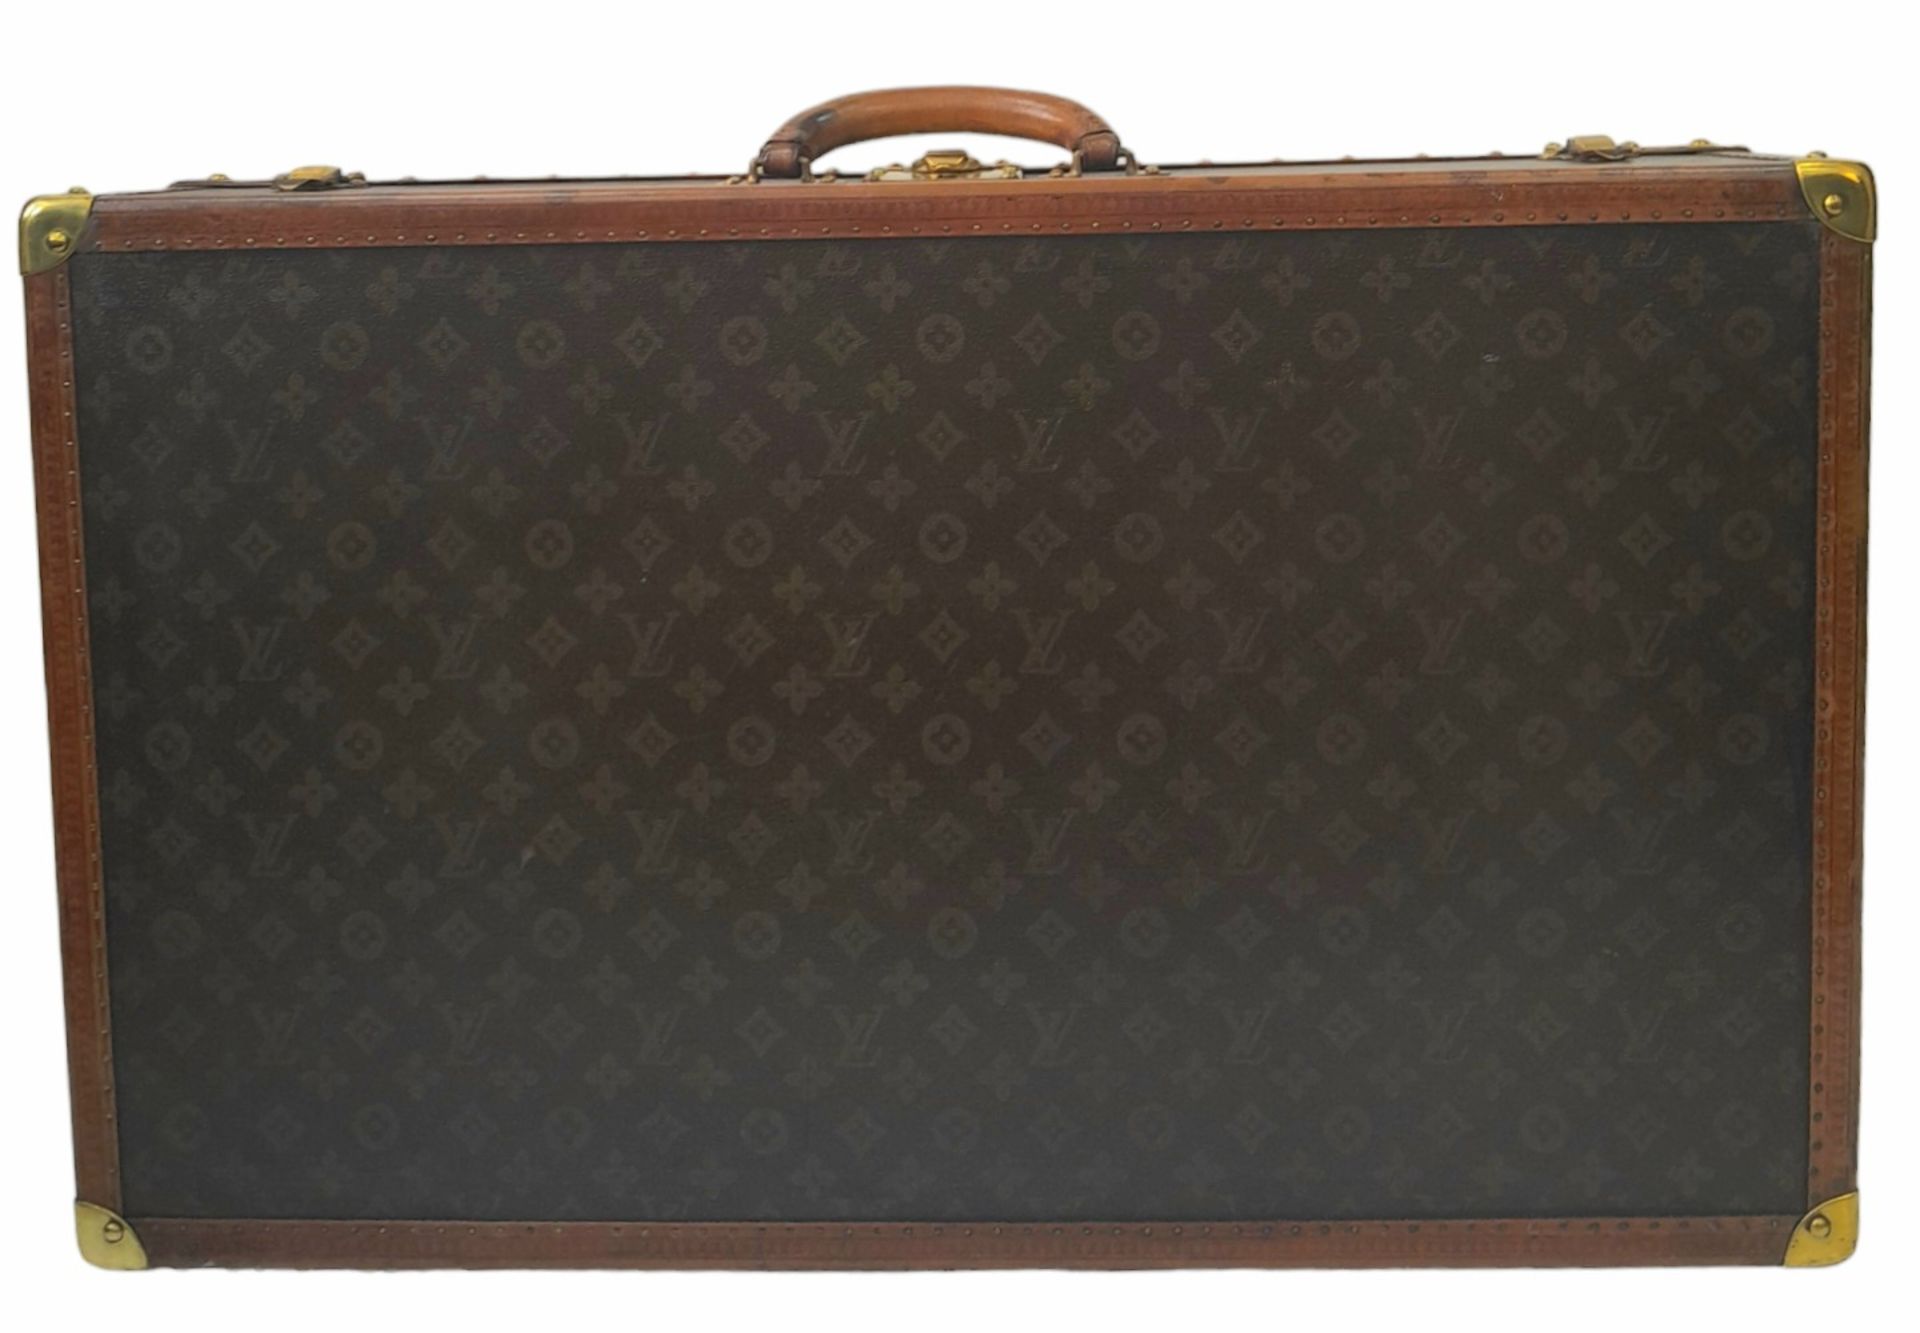 A Vintage Possibly Antique Louis Vuitton Trunk/Hard Suitcase. Canvas monogram LV exterior with - Image 2 of 16